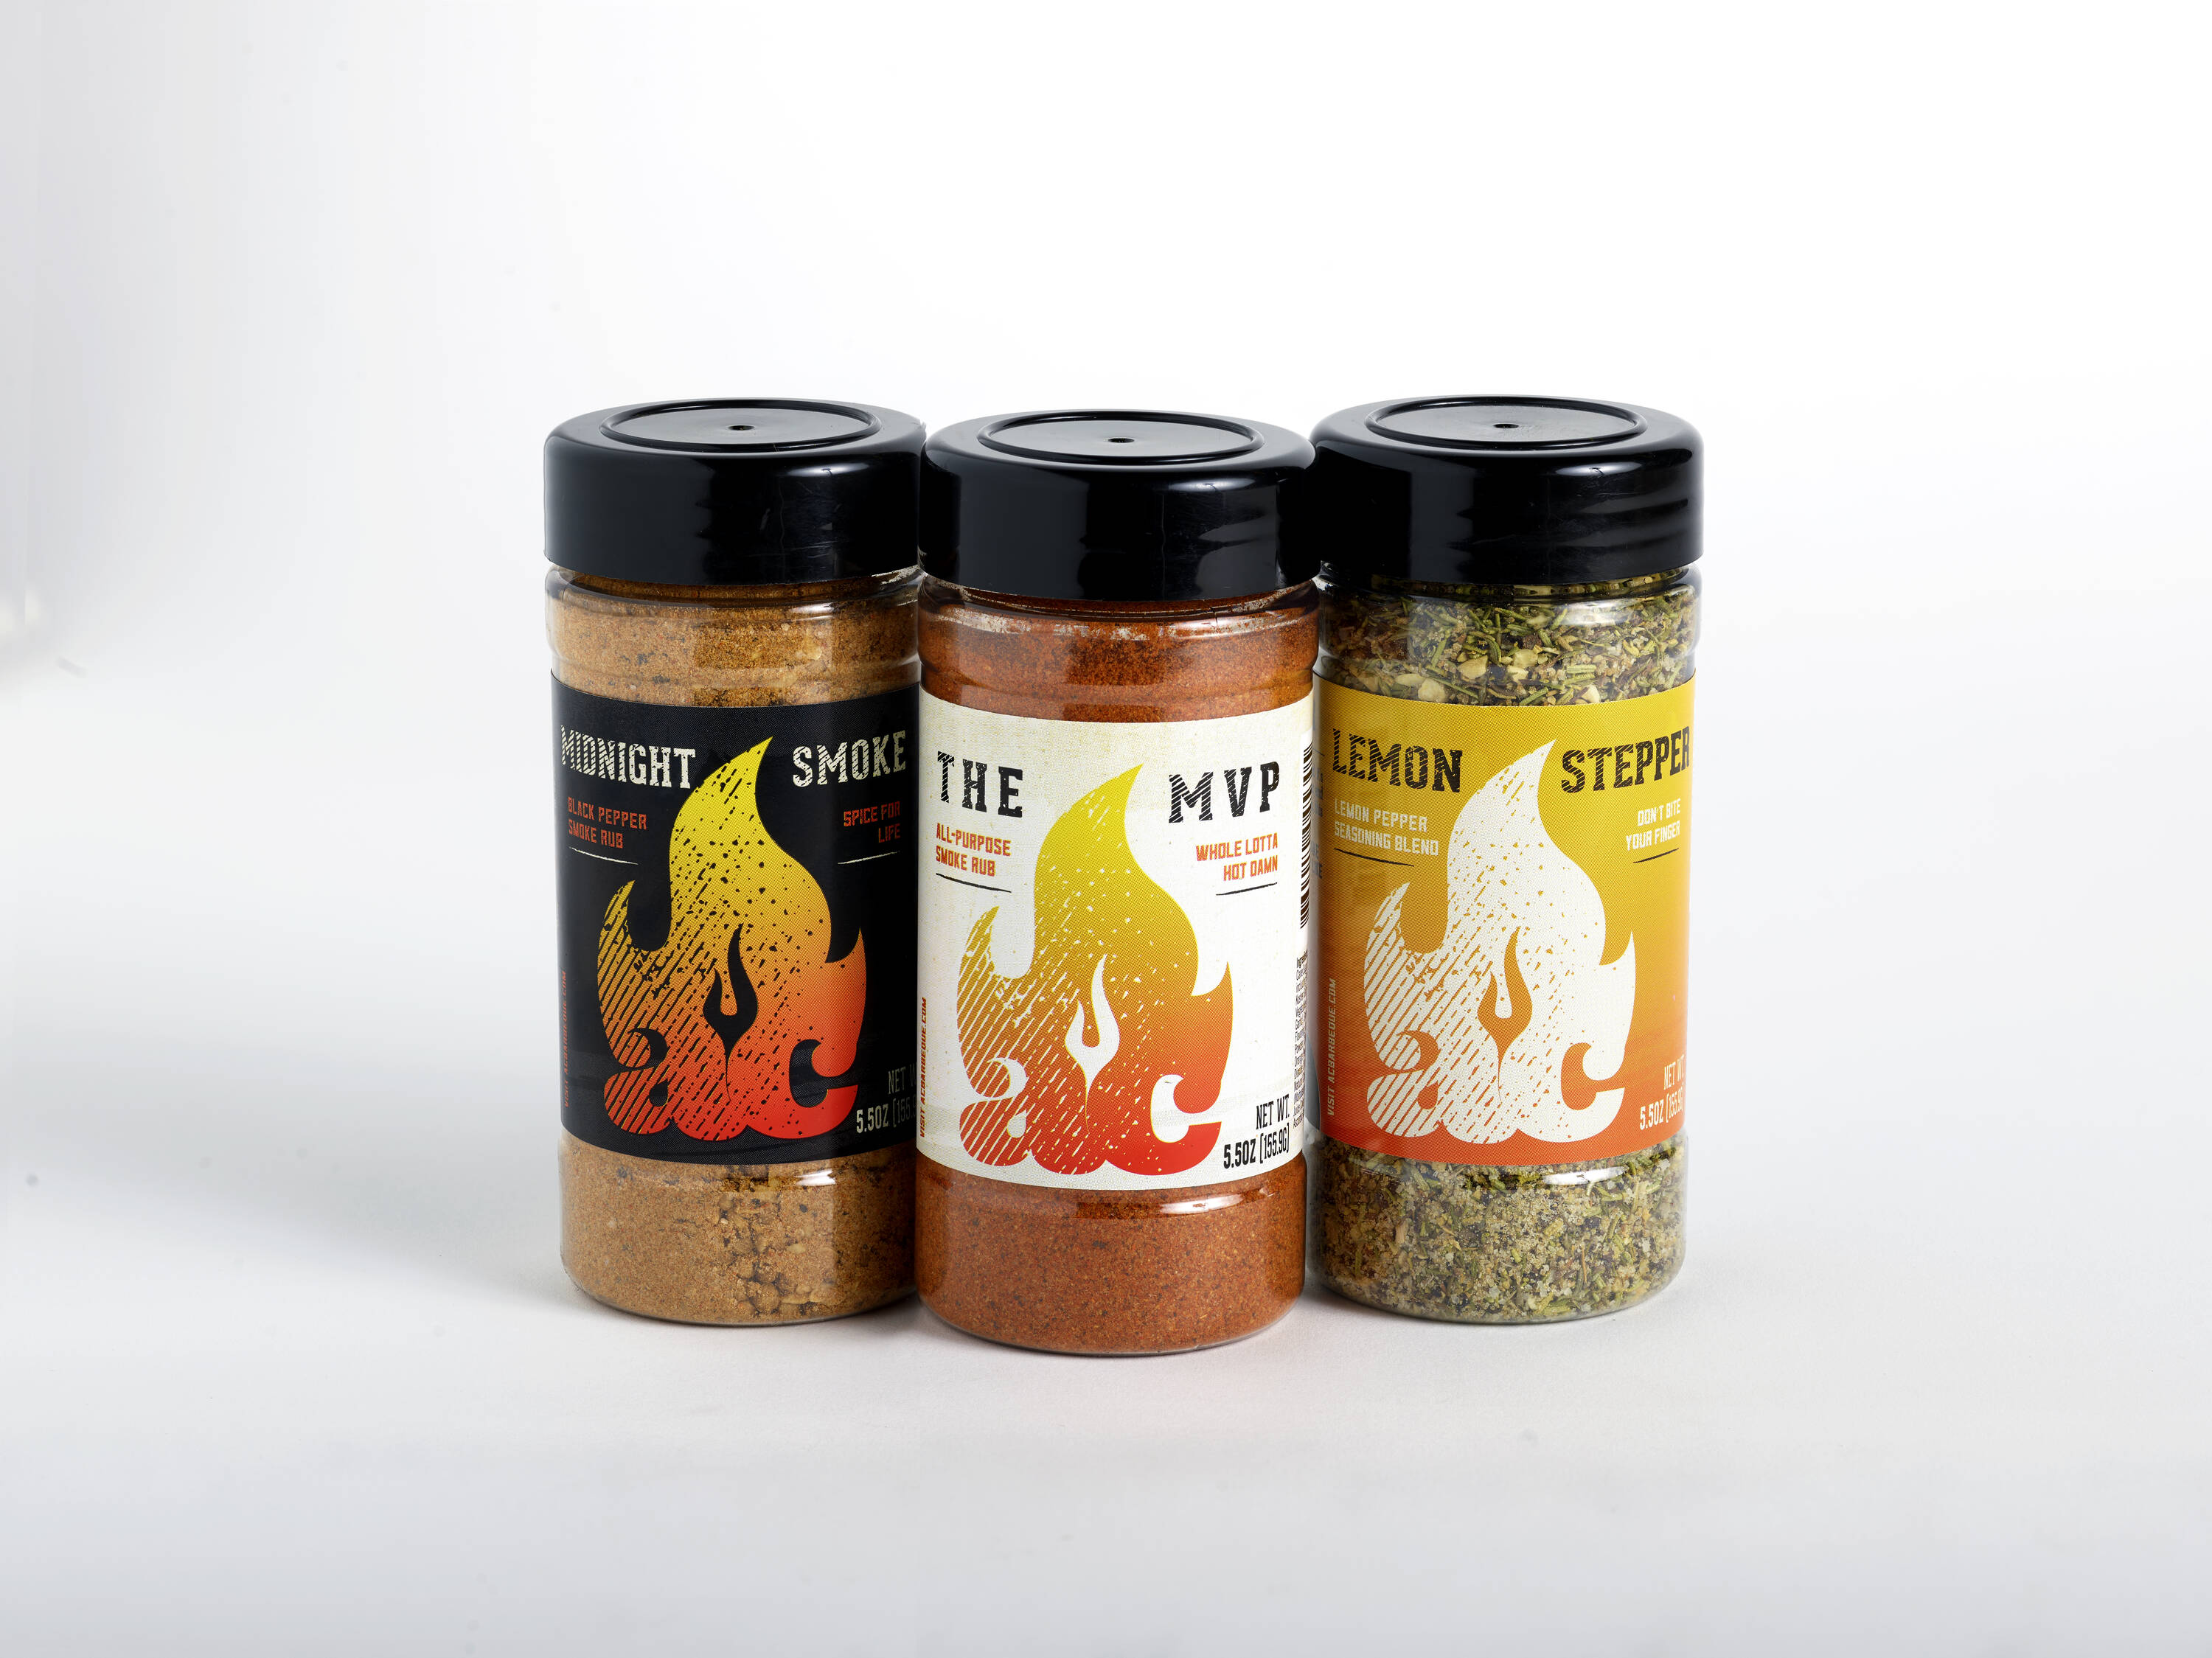 Barbecue Seasonings, Marinades, Rubs and Cures. We have Sugar Cure, Sodium  Nitrite (aka Speed Cure or Quick Cure), Encapsulated Citric Acid, AC Legg  Dry Smoke Flavor Seasonings, Ground Red Pepper (aka Cayenne